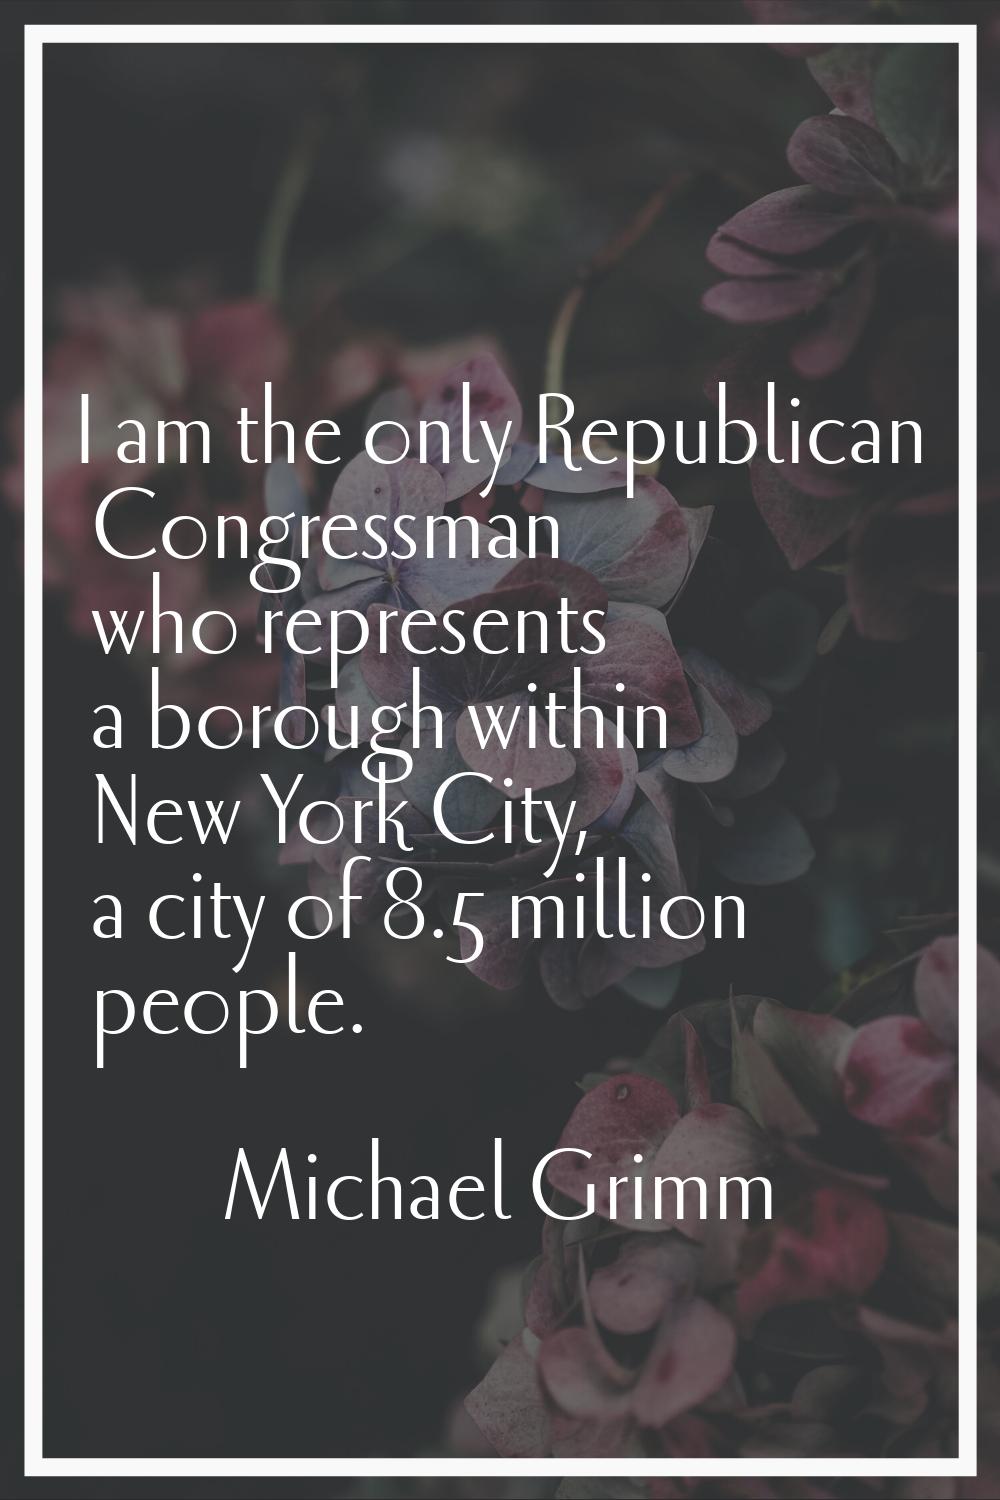 I am the only Republican Congressman who represents a borough within New York City, a city of 8.5 m